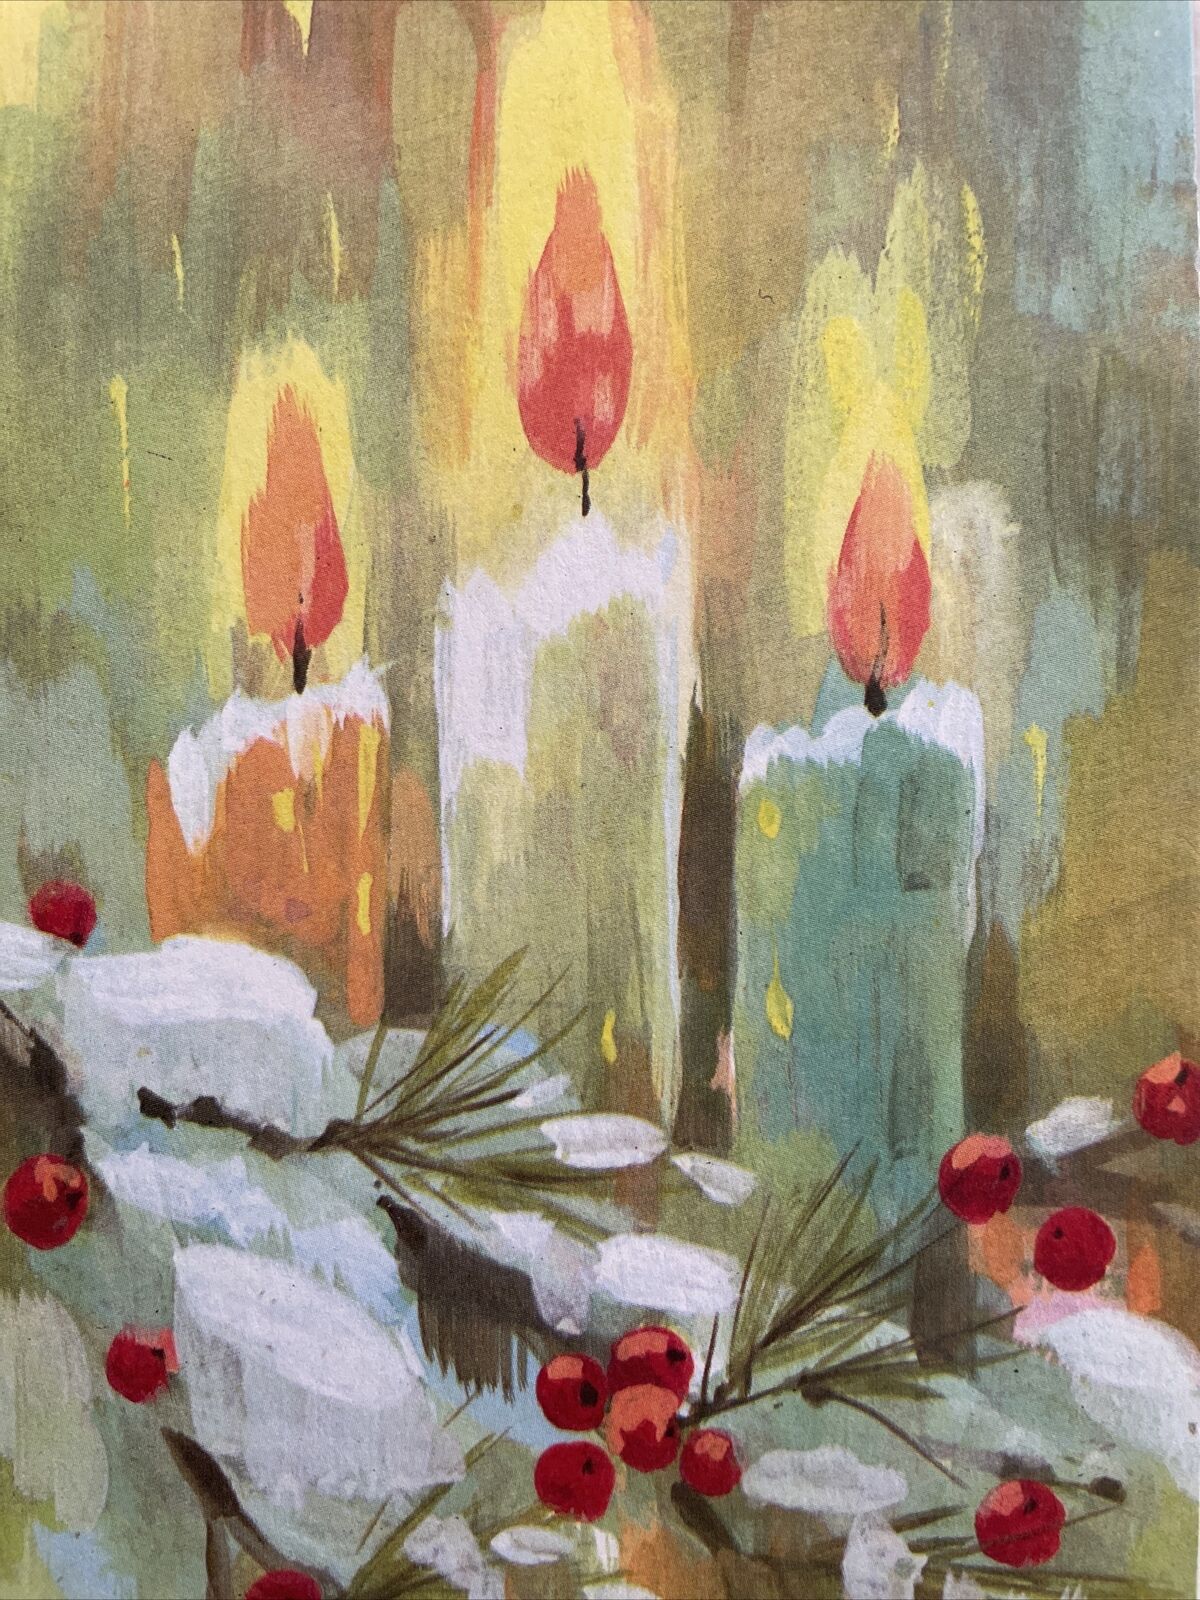 60s Mod Watercolors Chunky Candles Berries Snow VTG Christmas Card UNUSED